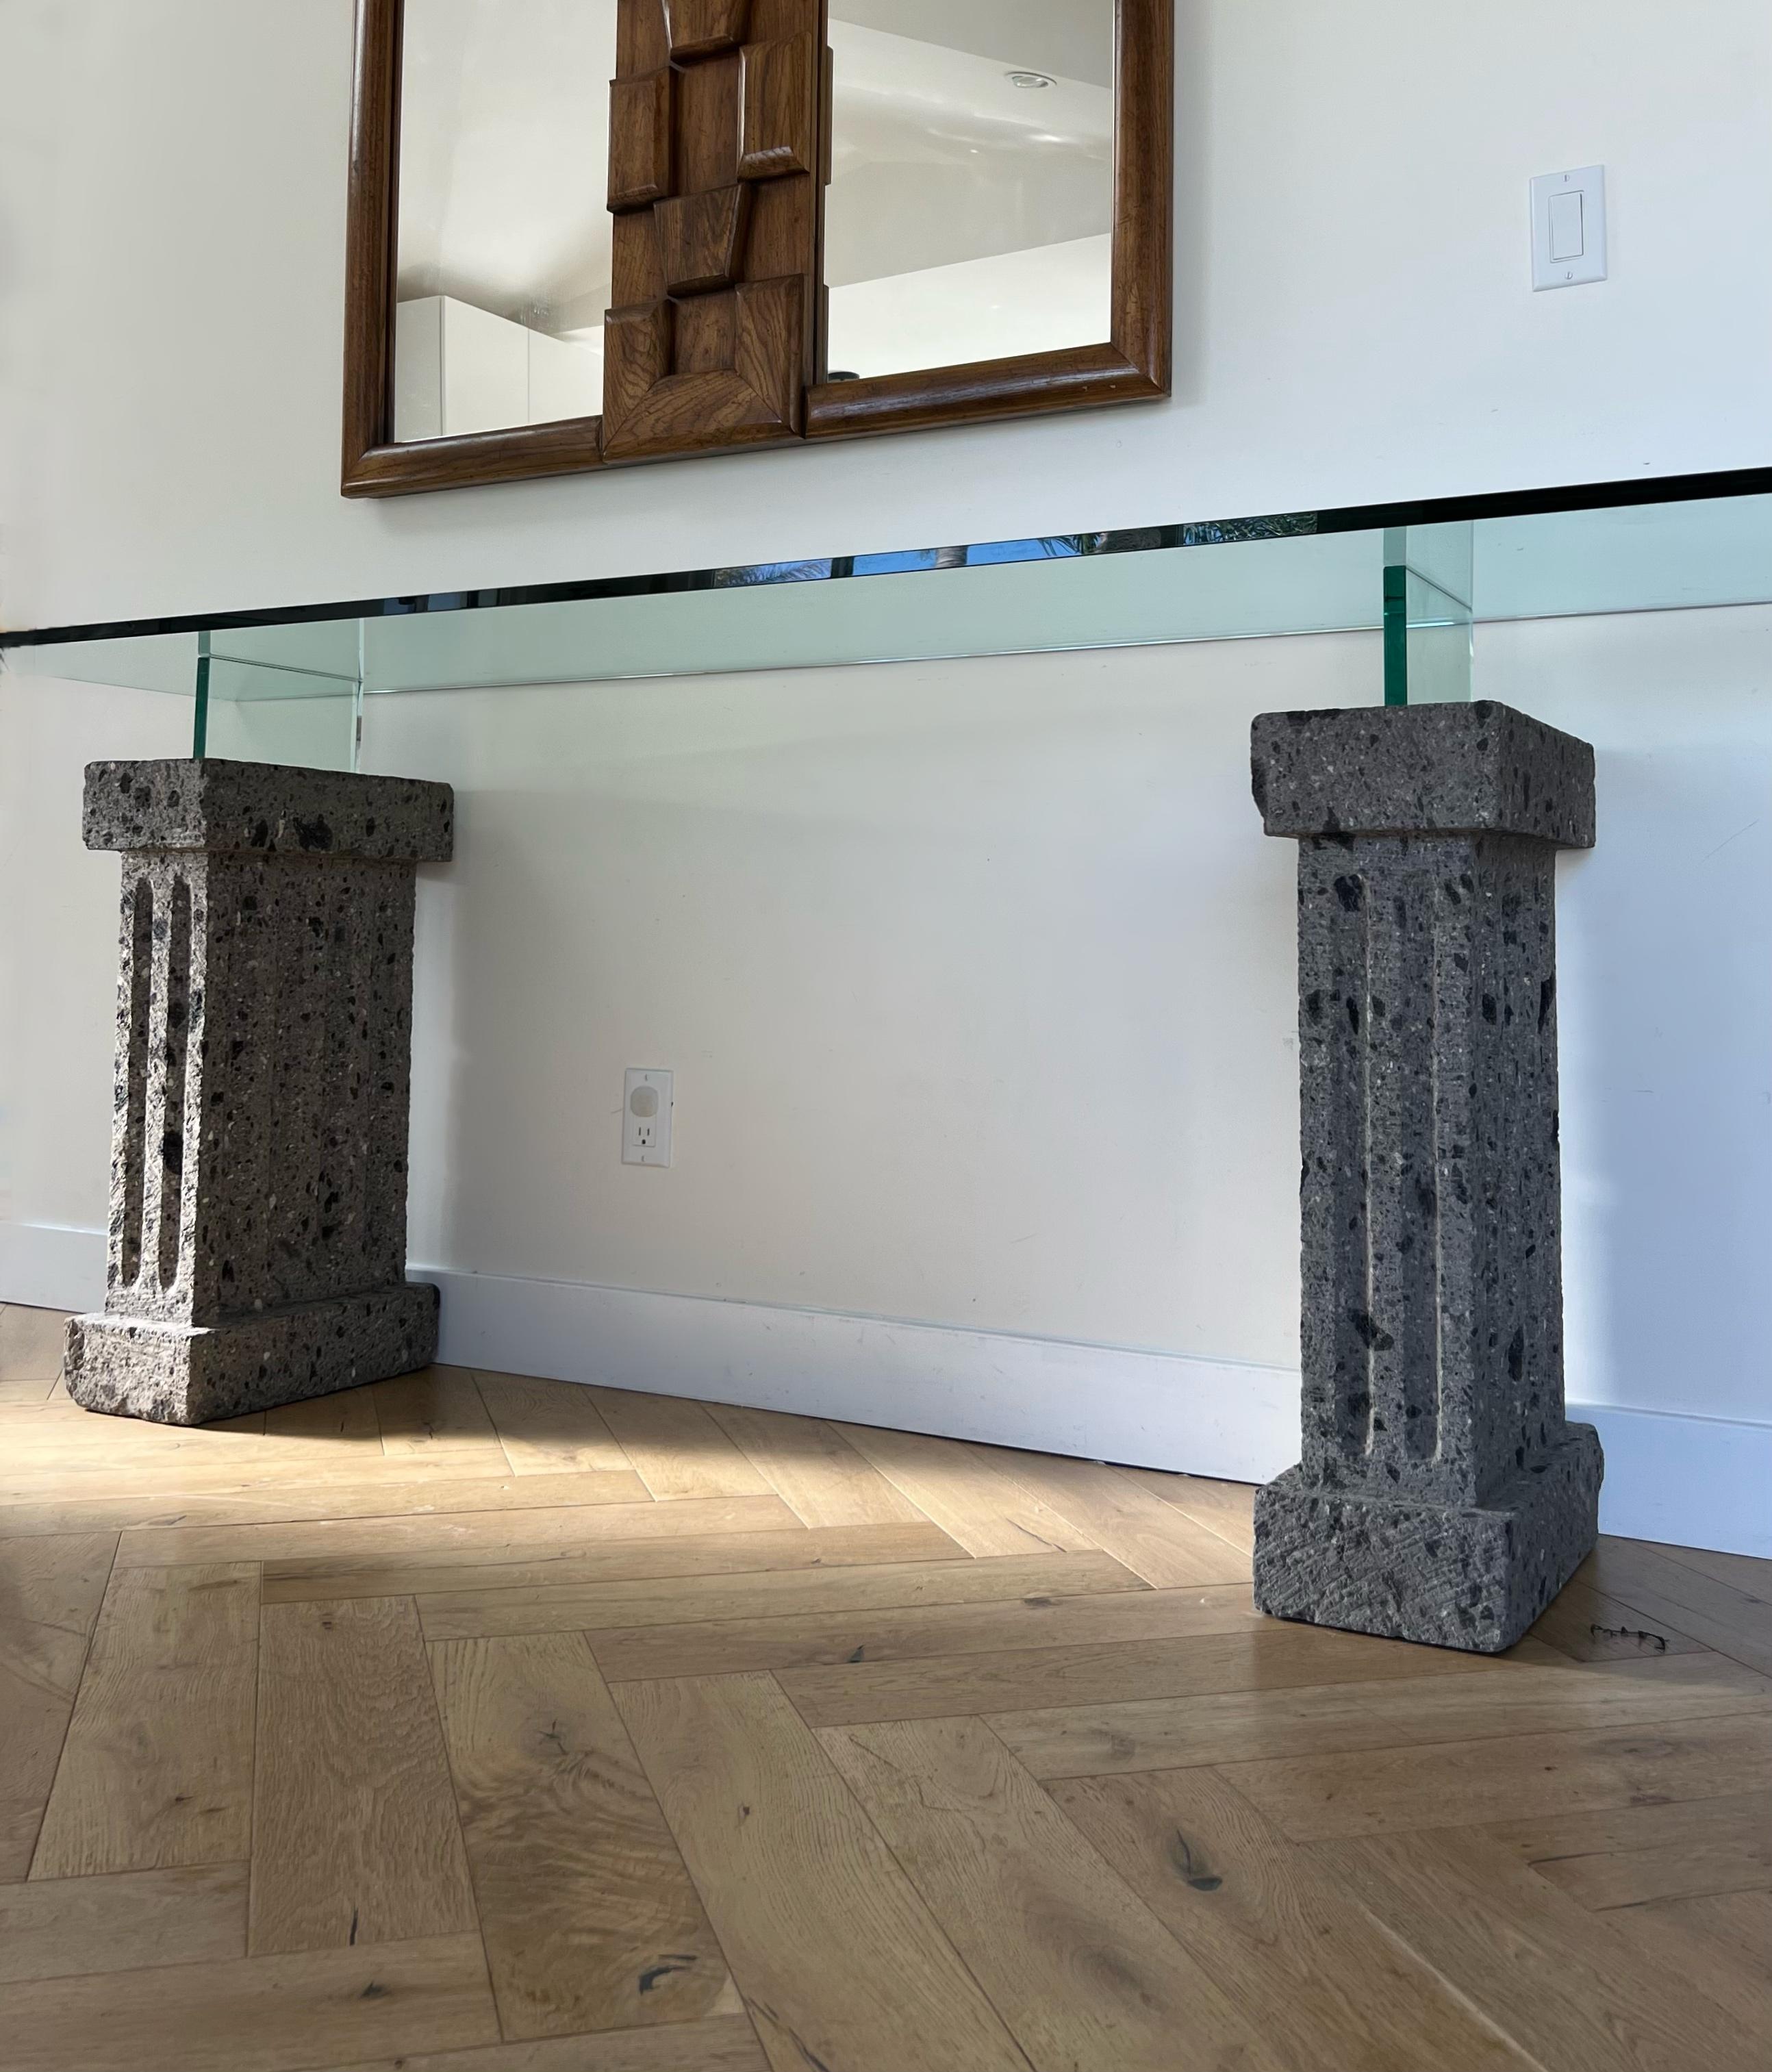 A monumental seven foot long brutalist console table of rock and glass, circa 1970s, with exceptional provenance: this piece hails from the Japanese consulate of Vancouver. Also combining postmodern and neoclassical sensibilities, two stone bases